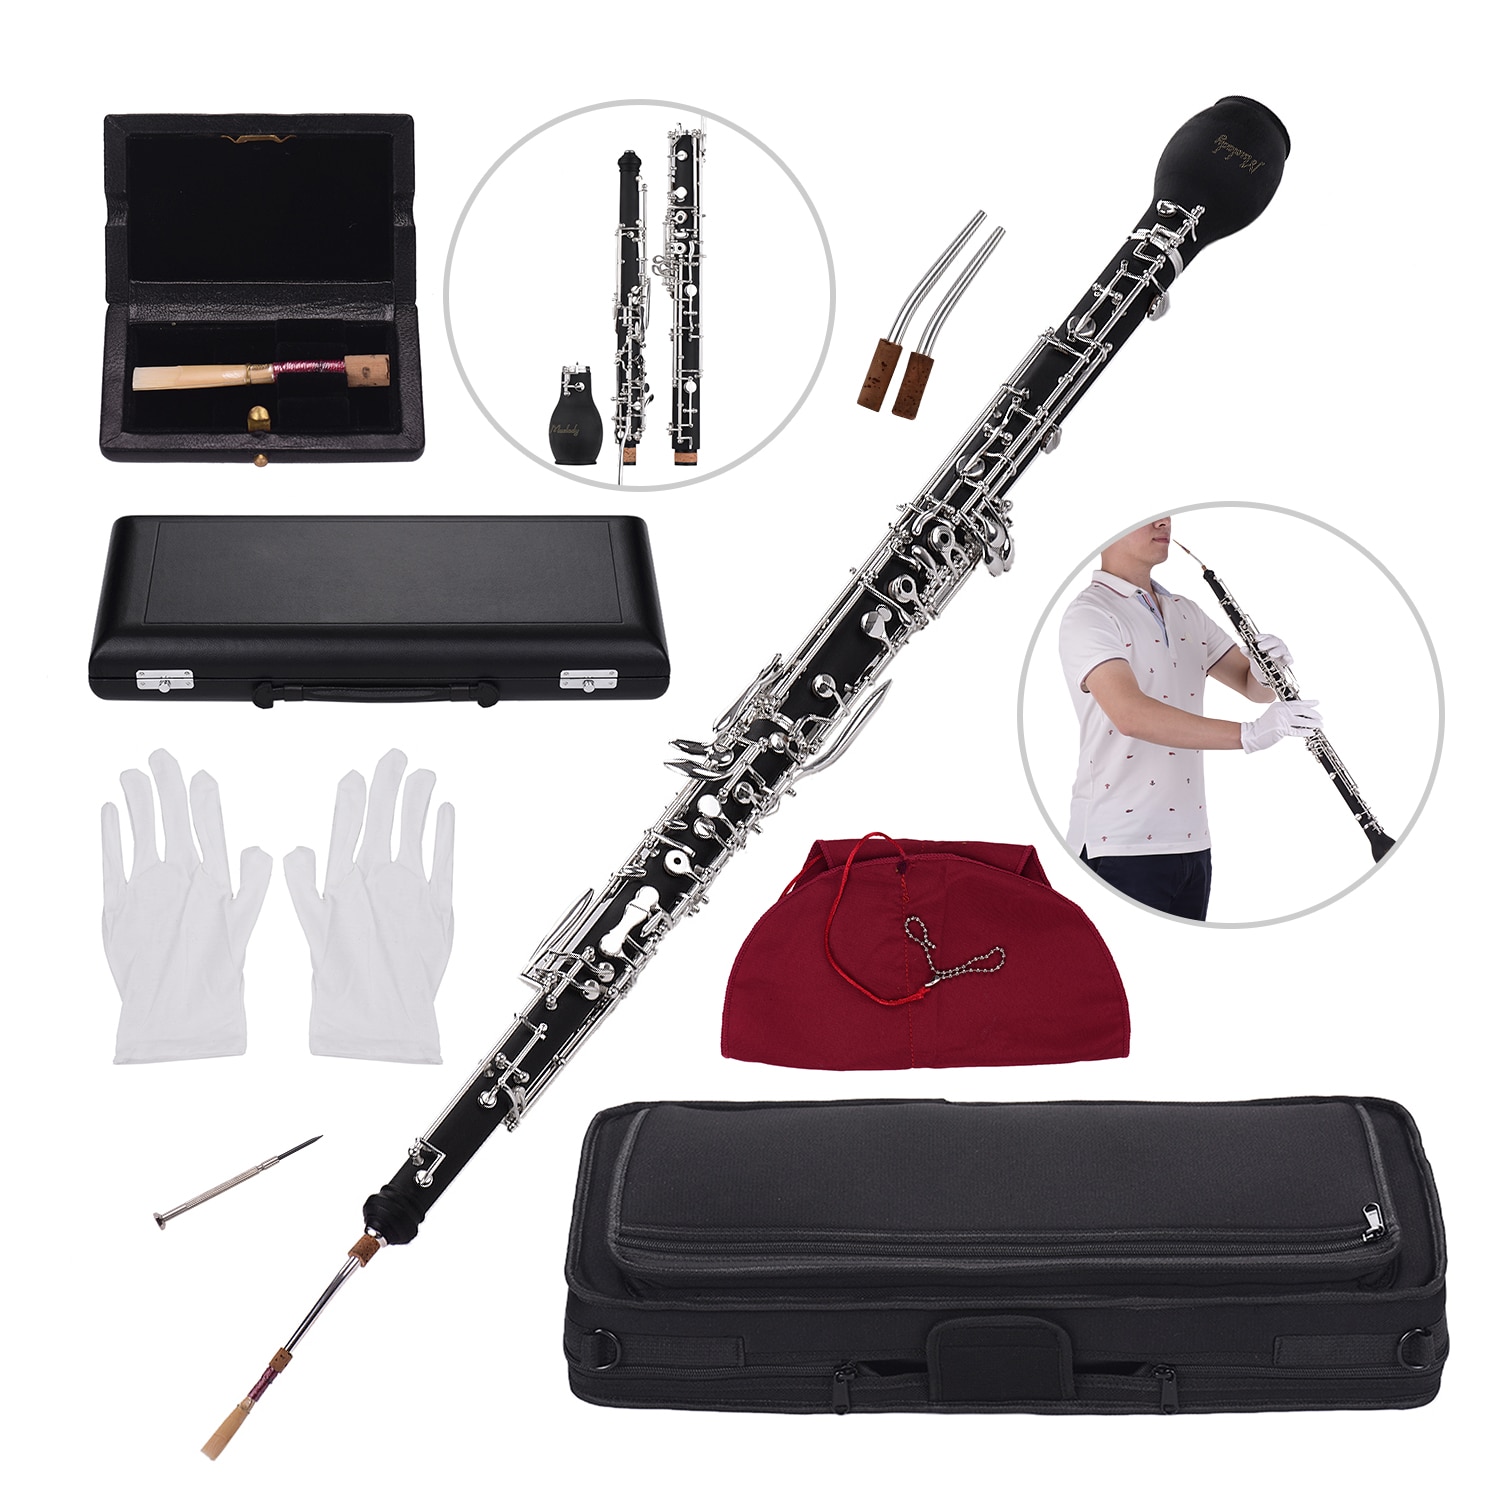 Professional English Horn Alto Oboe F Key Synthetic Wood Body Silver-plated Keys Woodwind Instrument with Oboe Aeccessaries